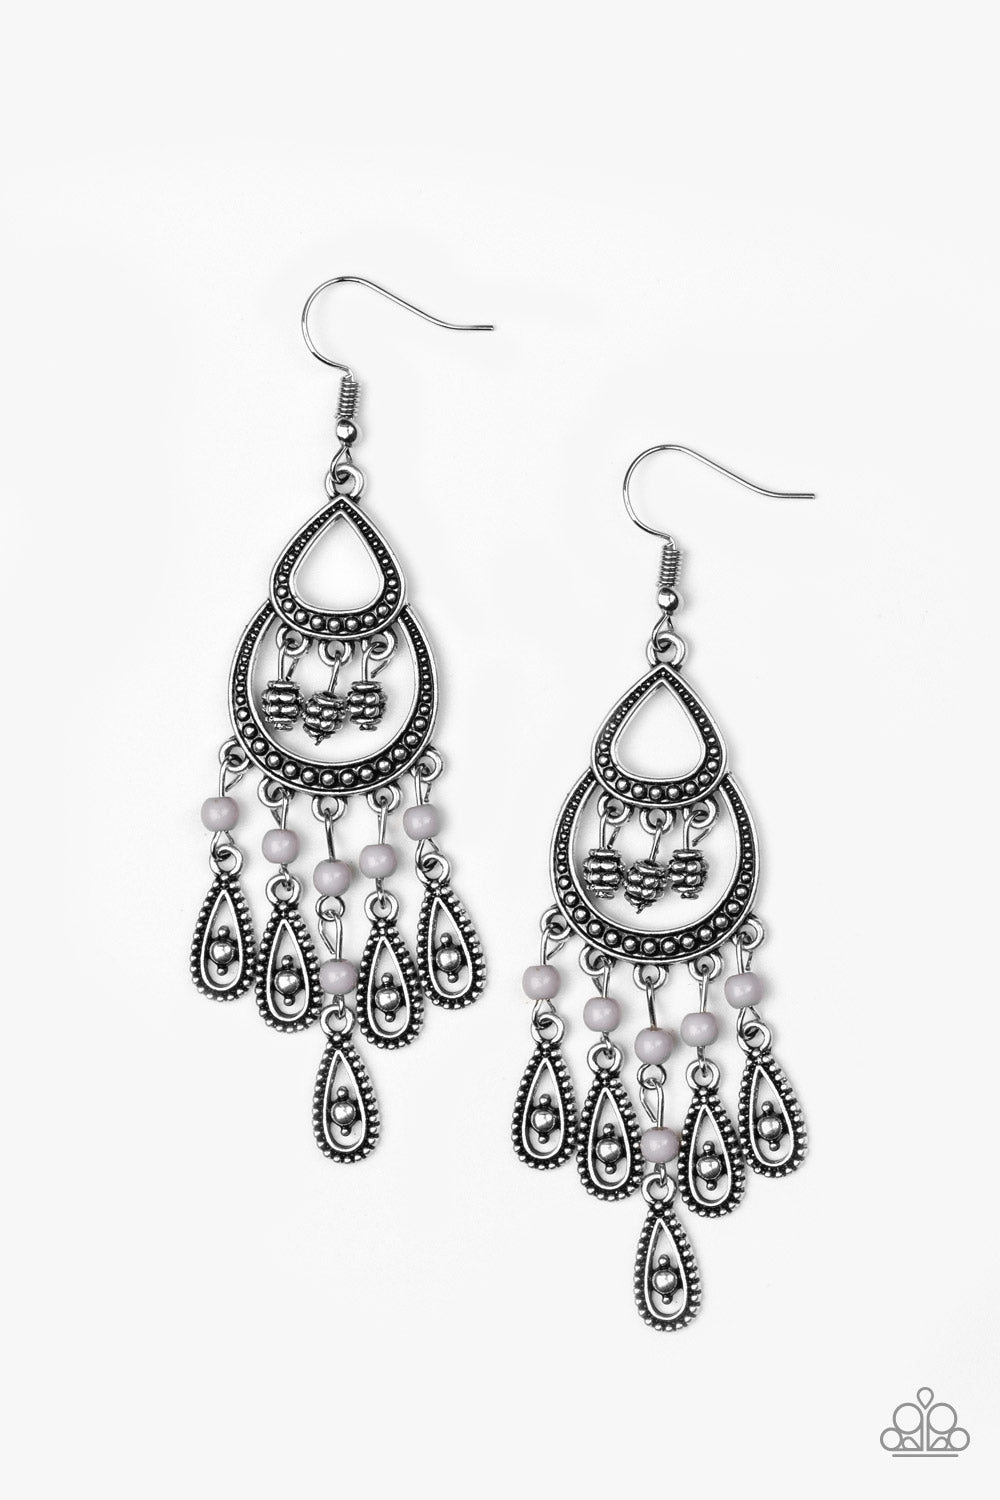 Eastern Excursion - Silver Earrings